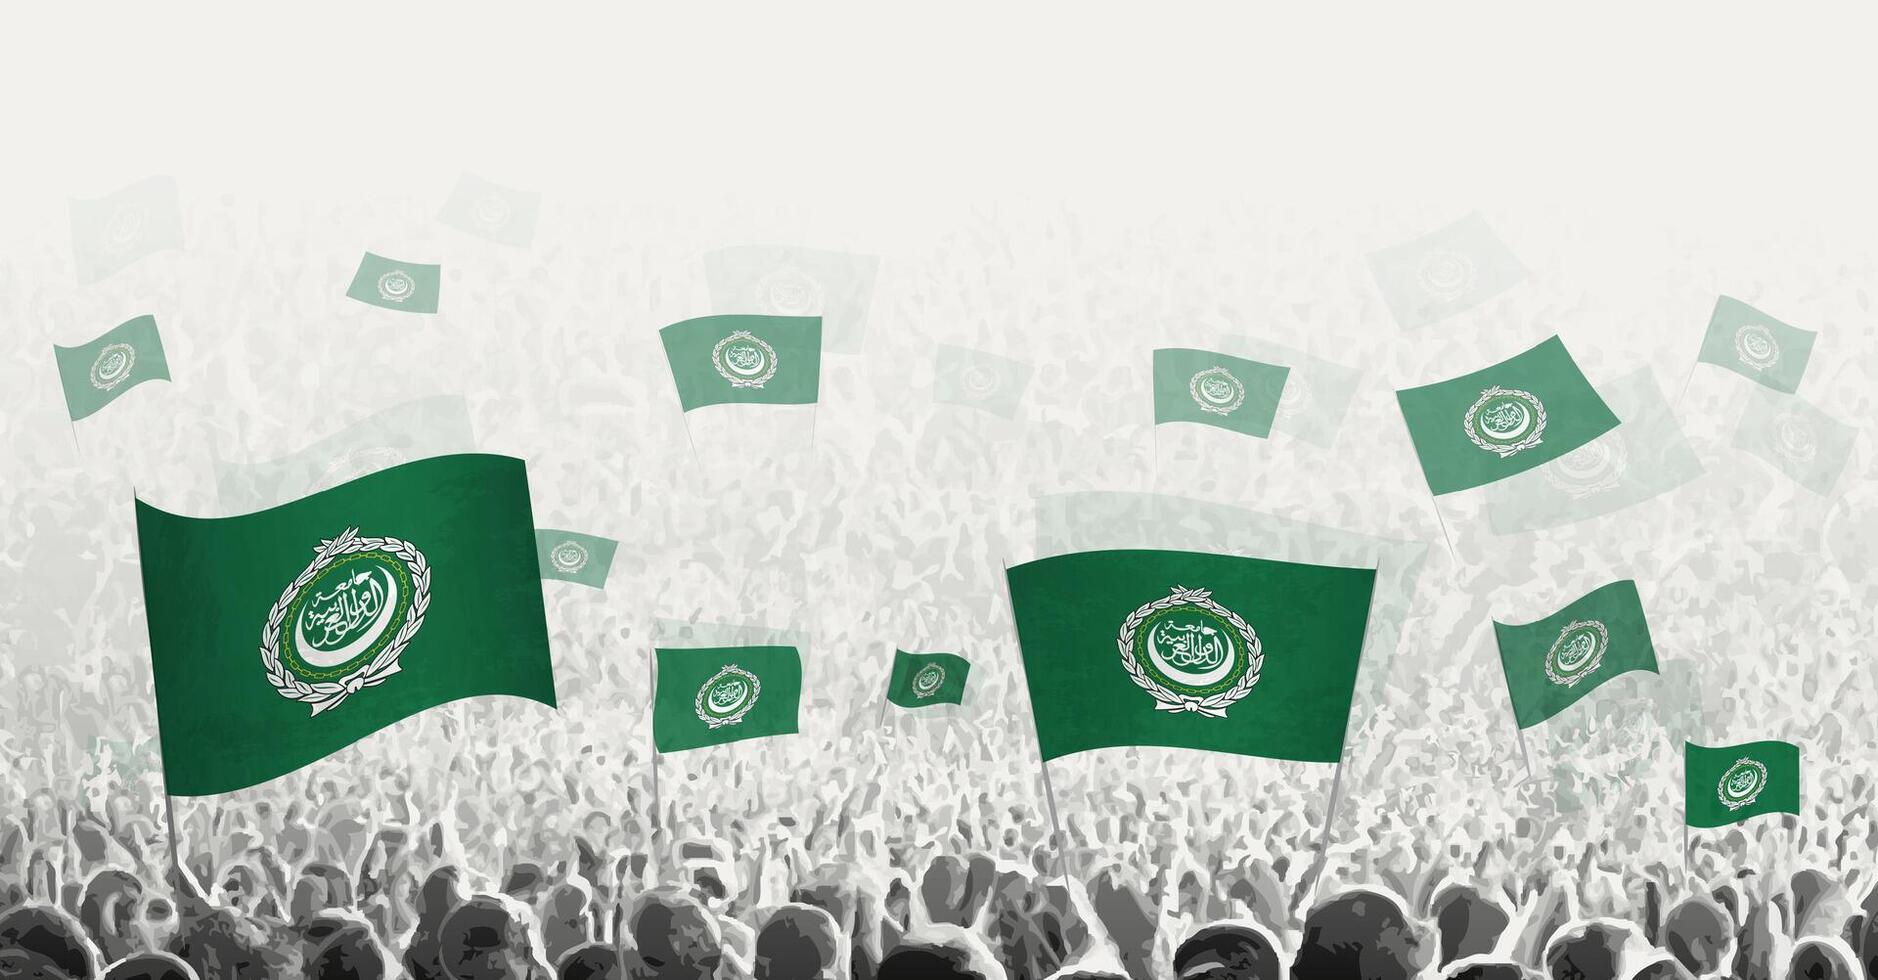 Abstract crowd with flag of Arab League. Peoples protest, revolution, strike and demonstration with flag of Arab League. vector